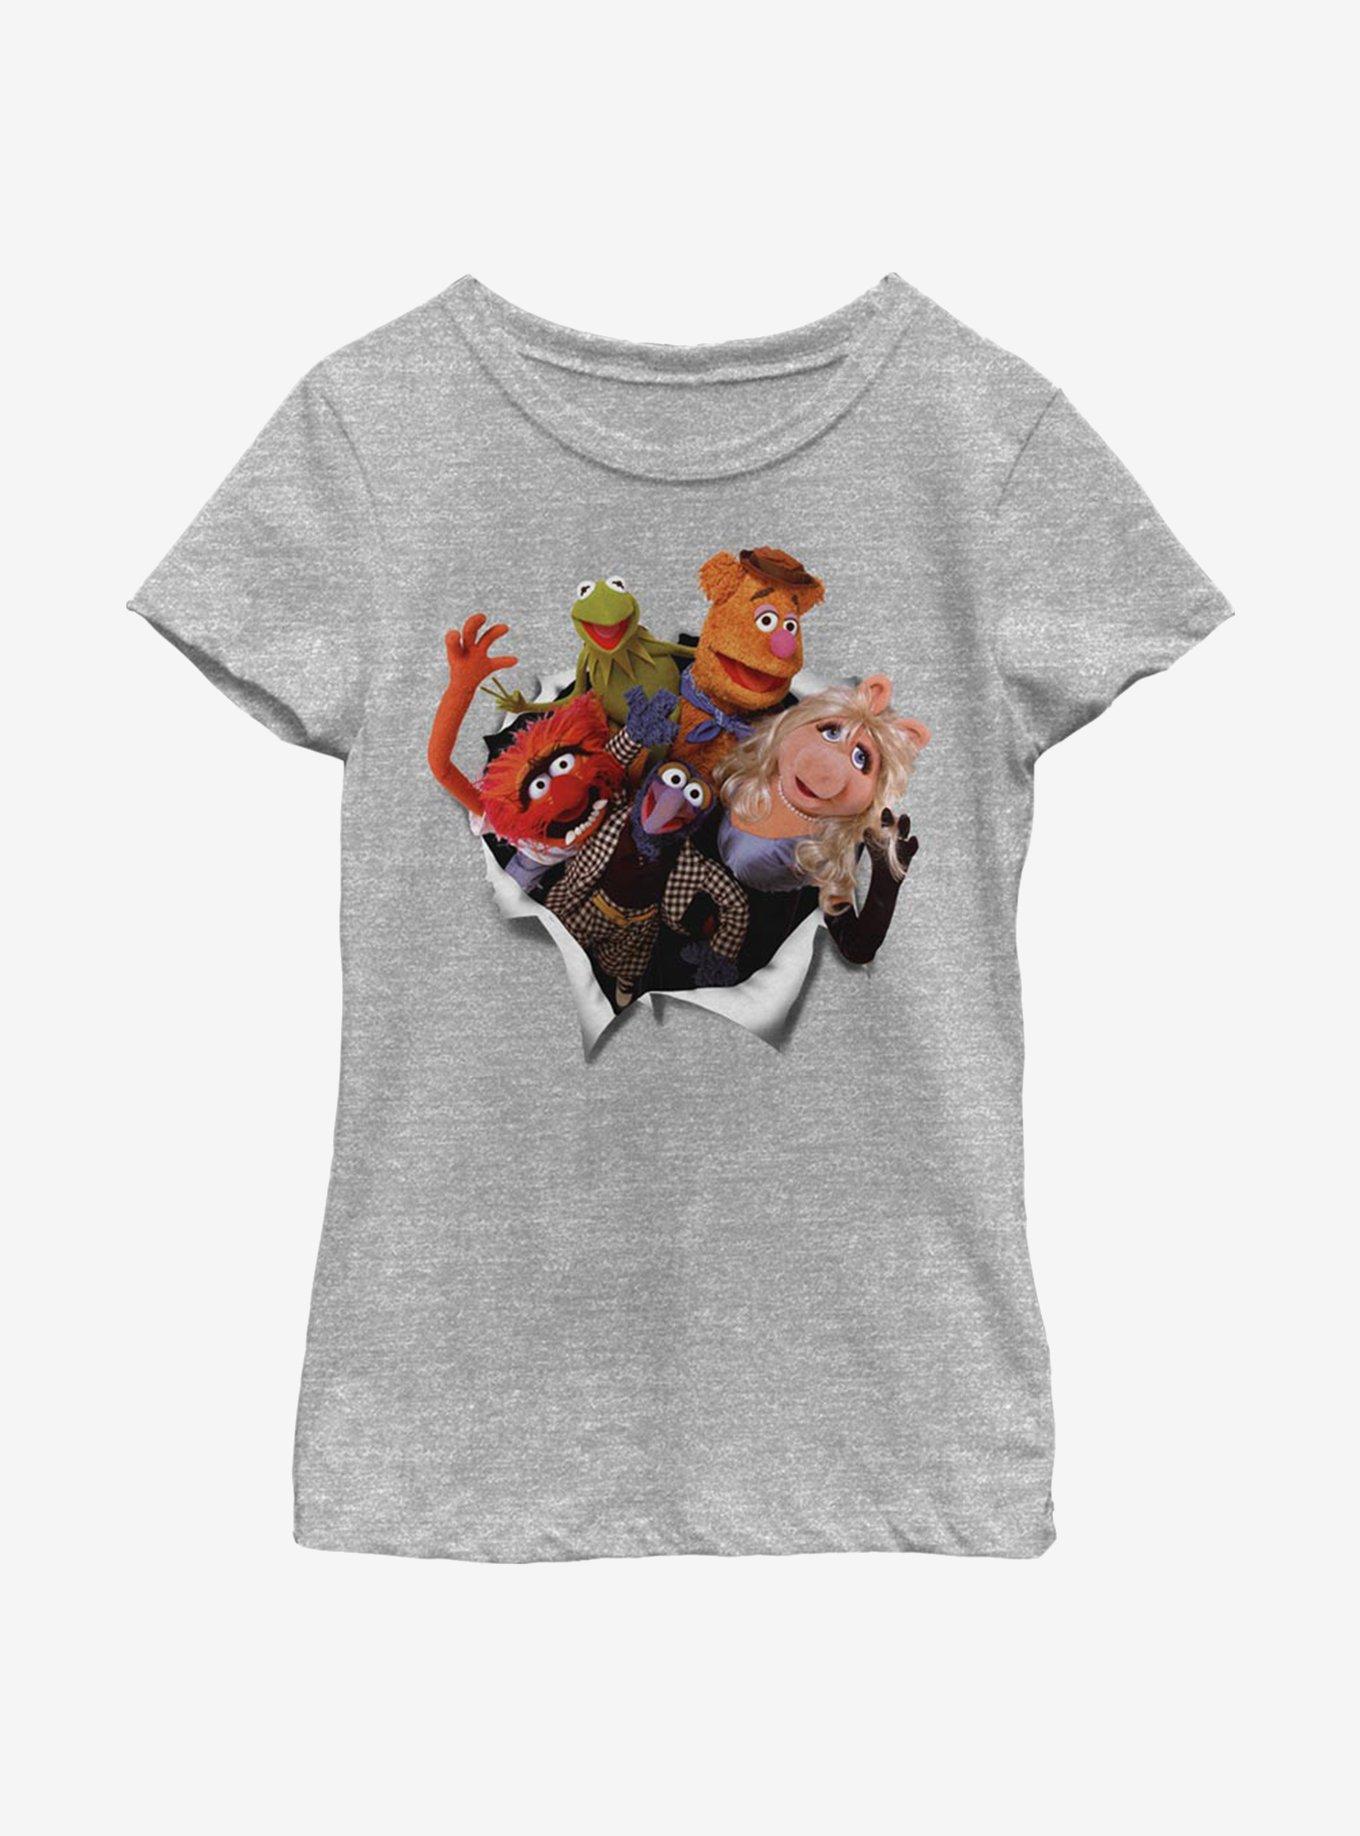 Disney The Muppets Muppet Breakout Youth Girls T-Shirt, , hi-res